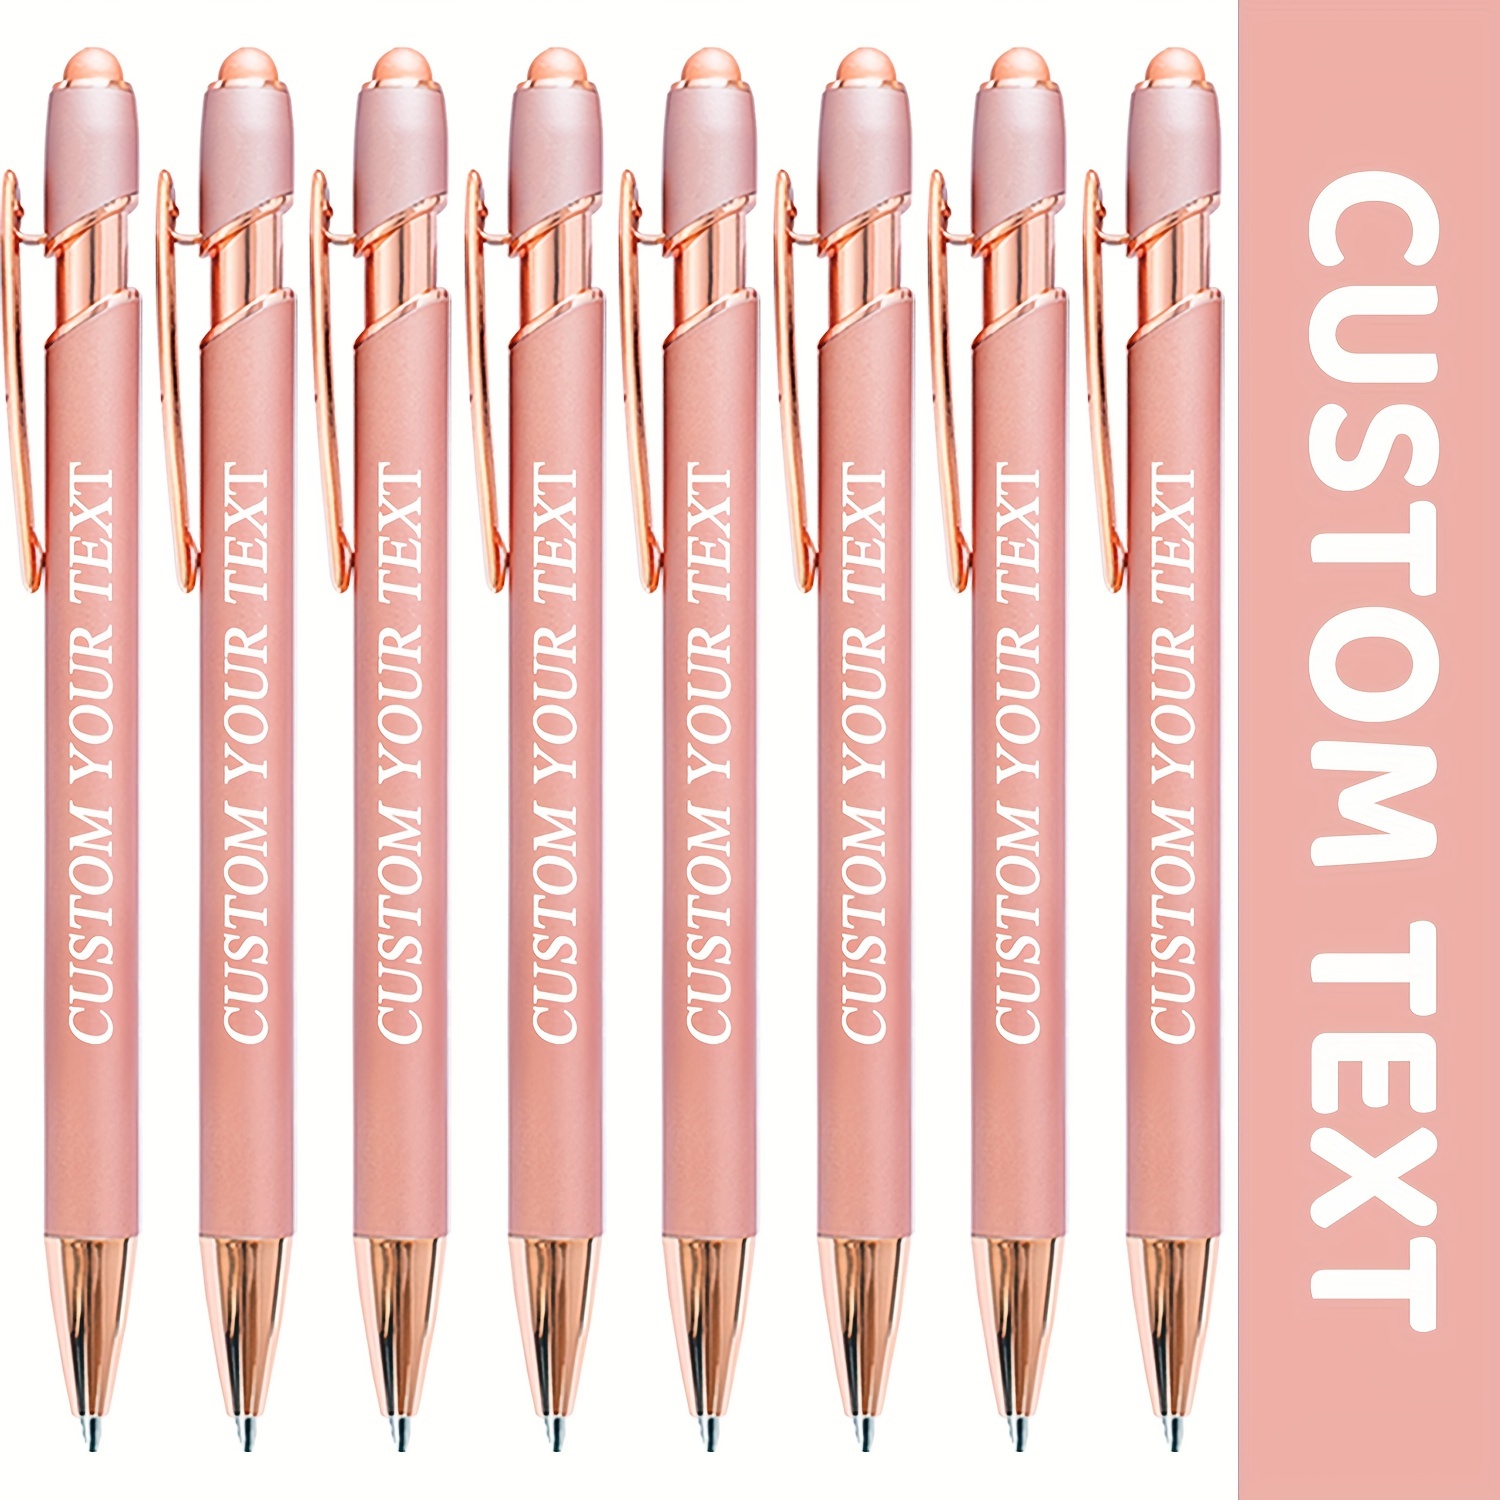 

Custom 8-piece Rose Golden Ballpoint Pens With Black Ink - Dual Writing & Touchscreen Functionality, Ideal Gift For Friends, Family, And Colleagues